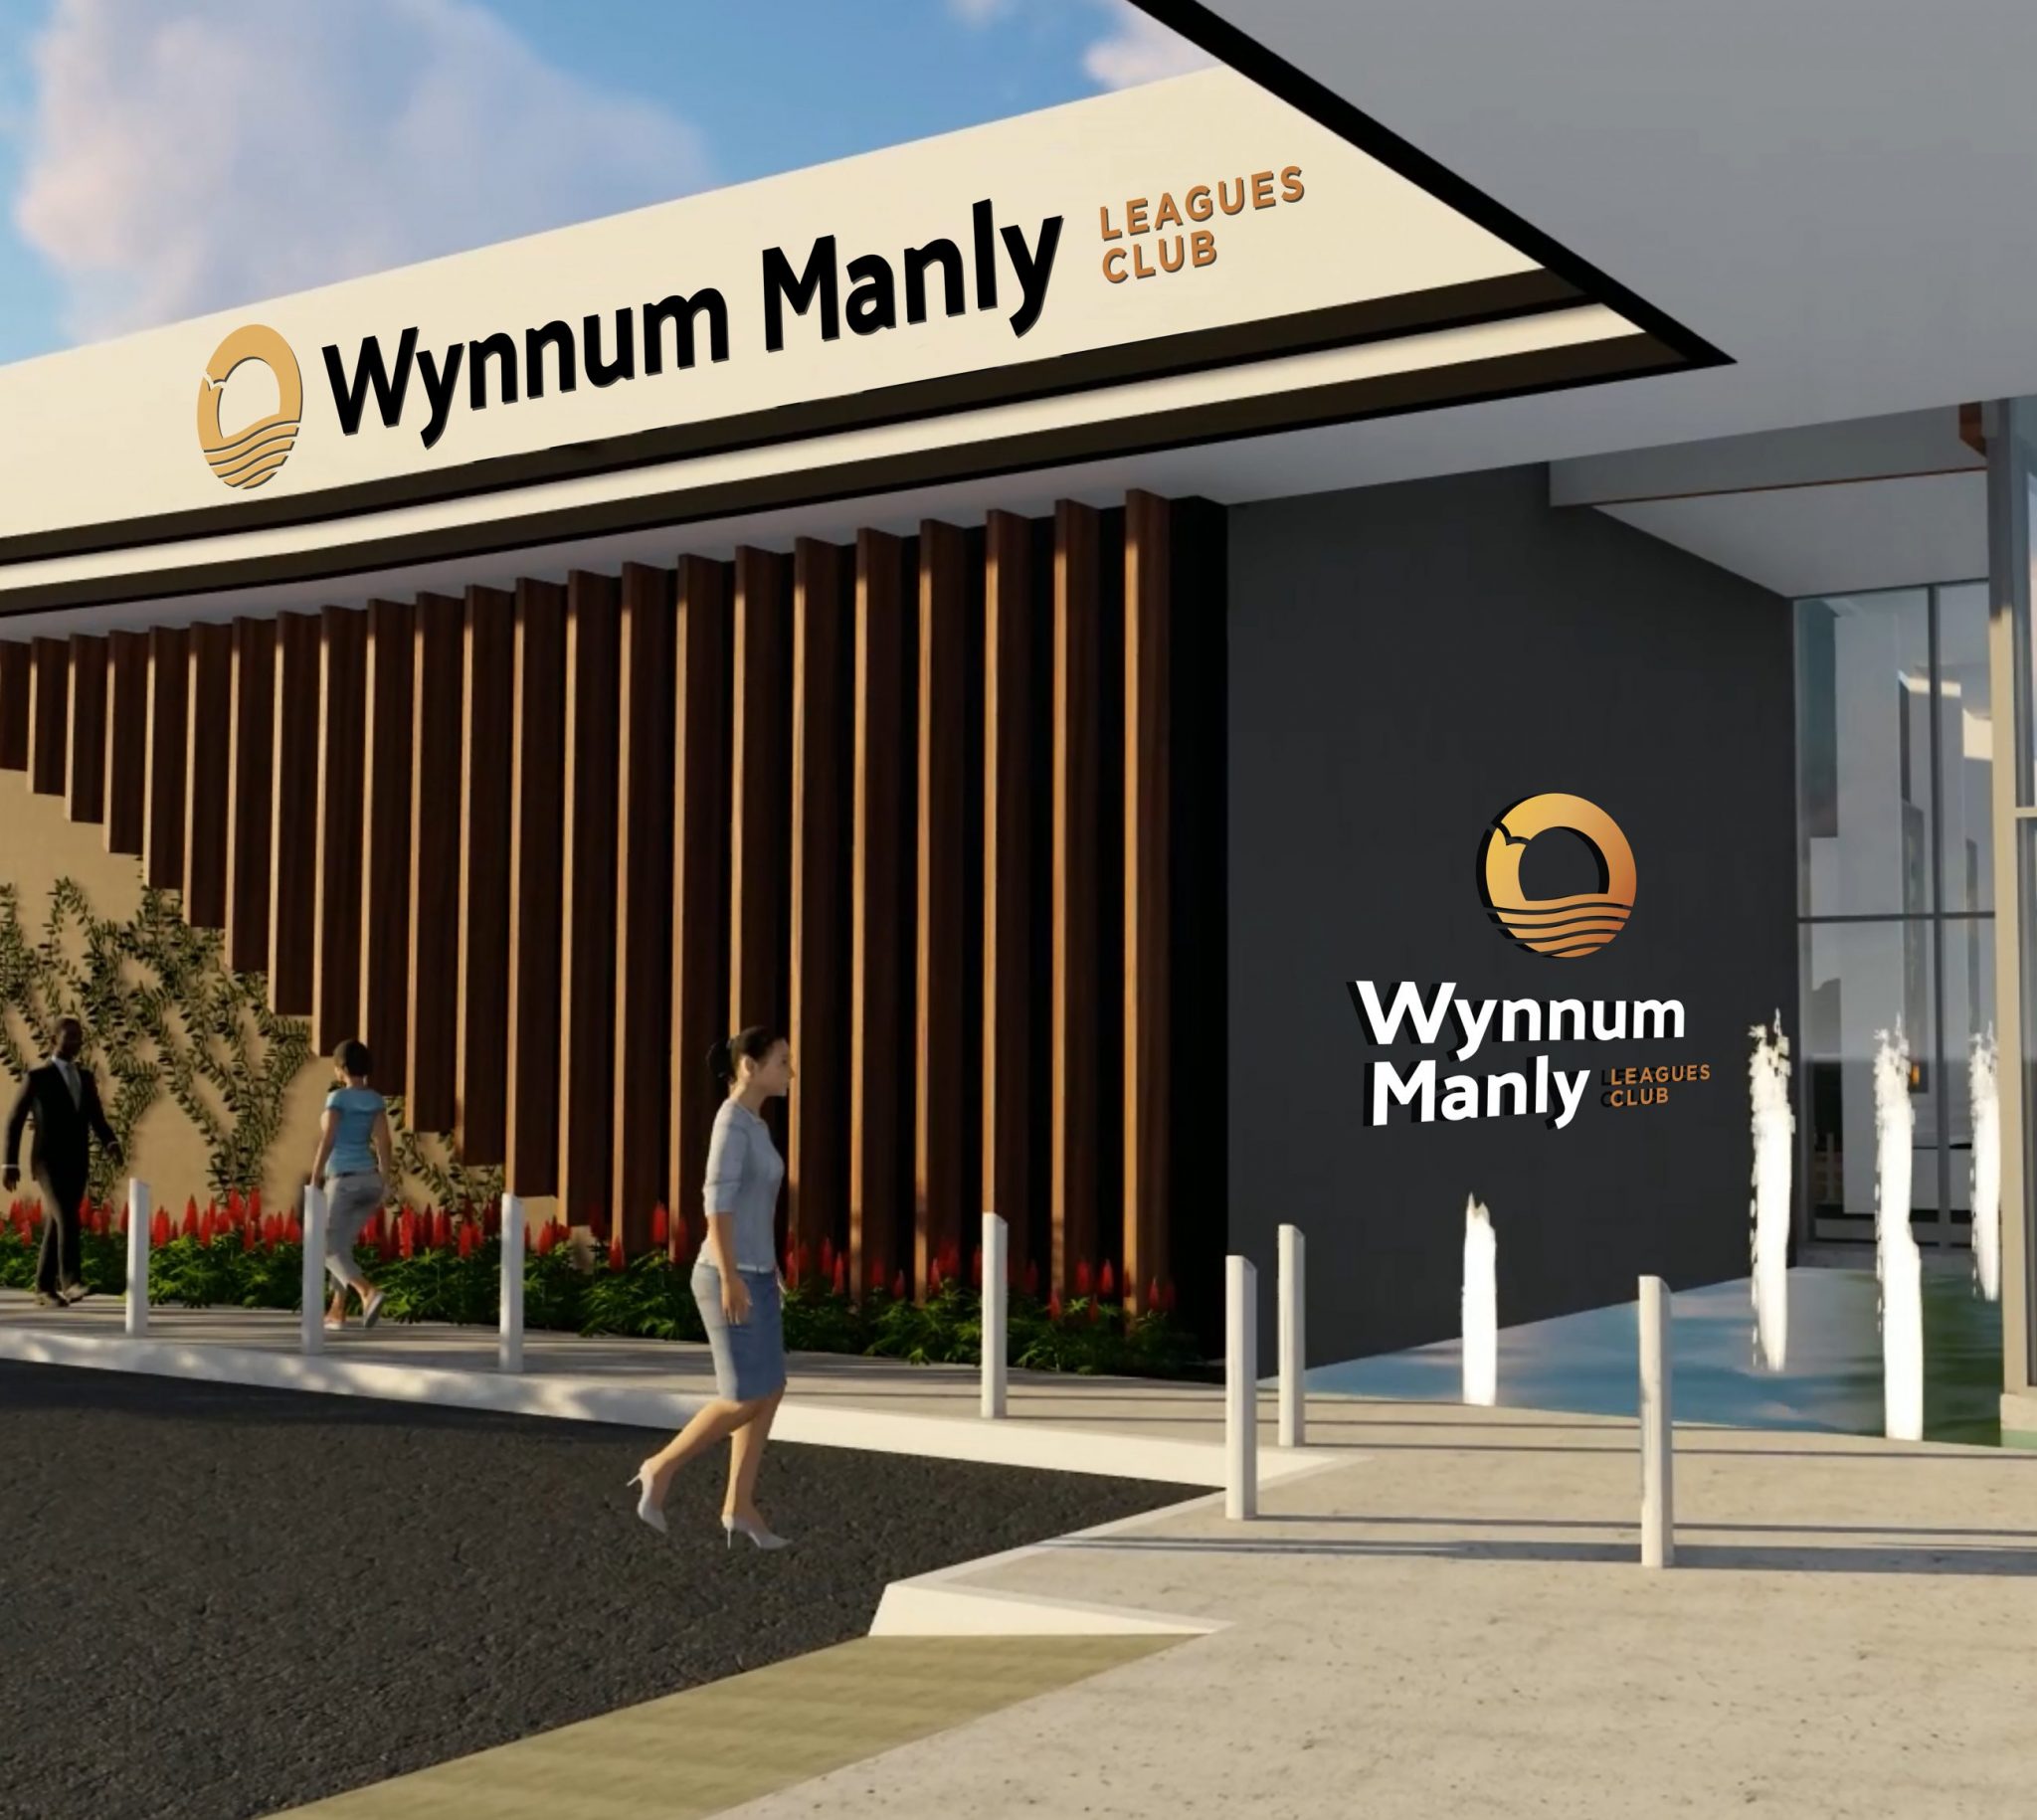 Wynnum Manly Leagues Club mockup images of new brand signage